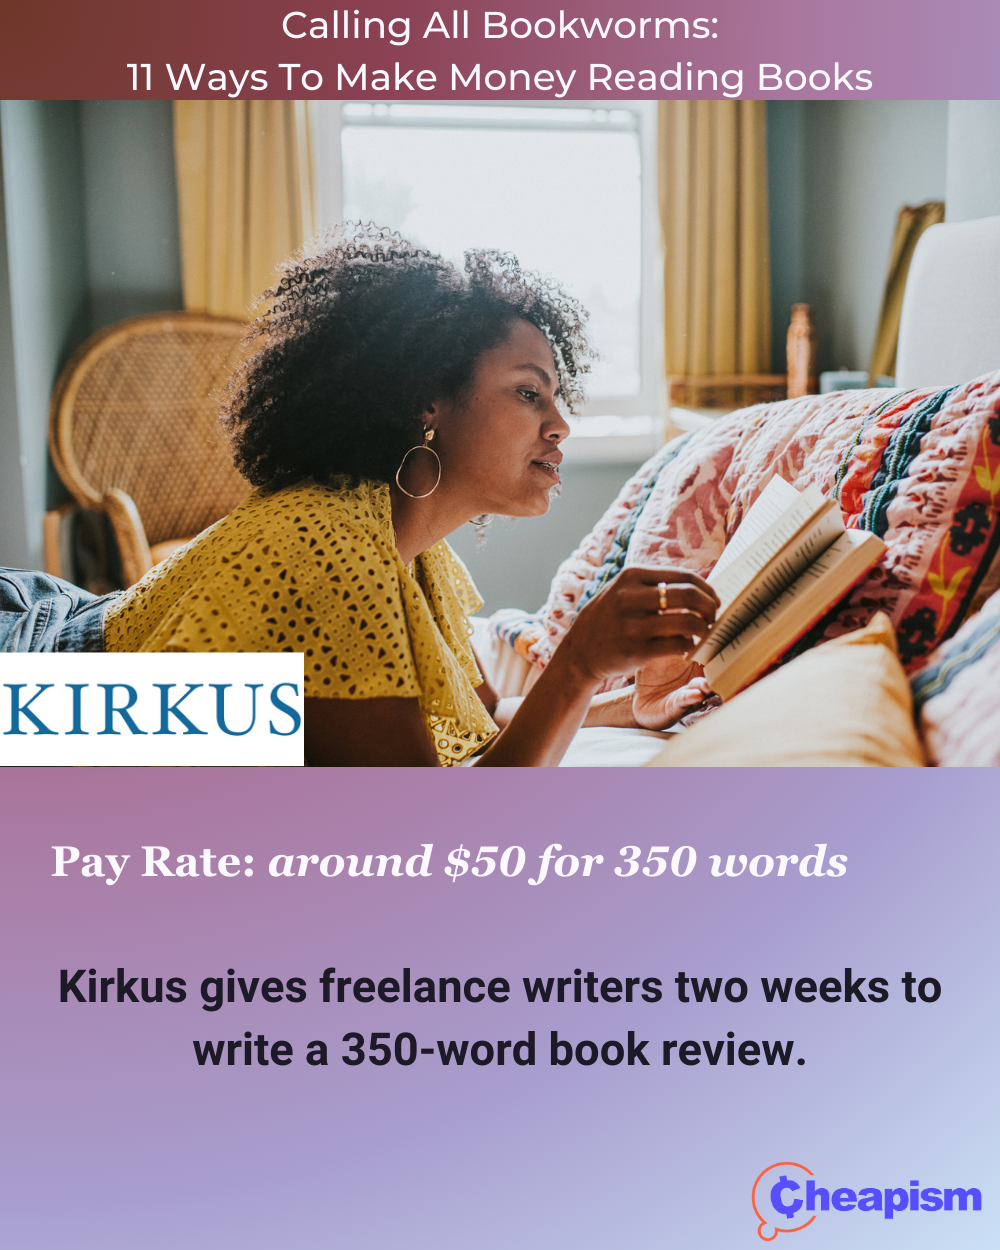 This long-running New York City-based magazine publishes over 10,000 book reviews a year. According to Kirkus’ website, they’re currently looking for experienced reviewers to <a href="https://www.kirkusreviews.com/about/careers/">write for the publication’s self-published section</a>. Applications require a resume, writing samples, and a list of your reviewing specialties.